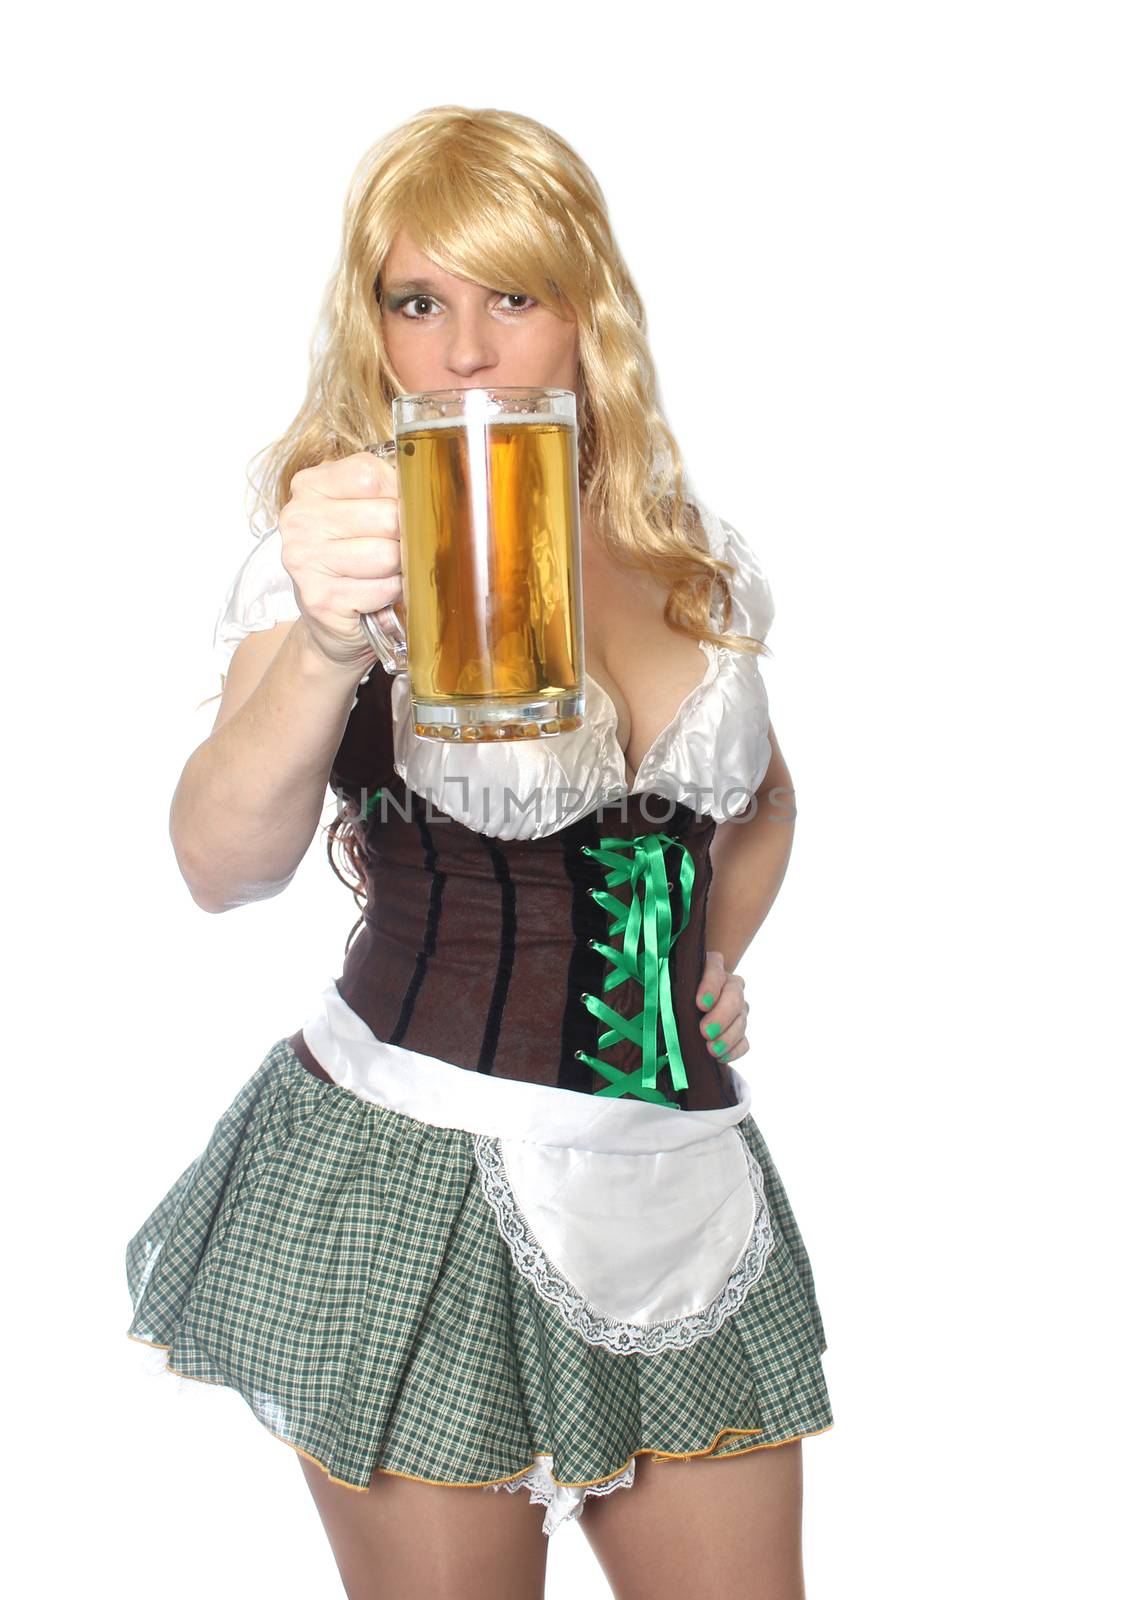 Pub or Tavern Waitress with Beer by Marti157900